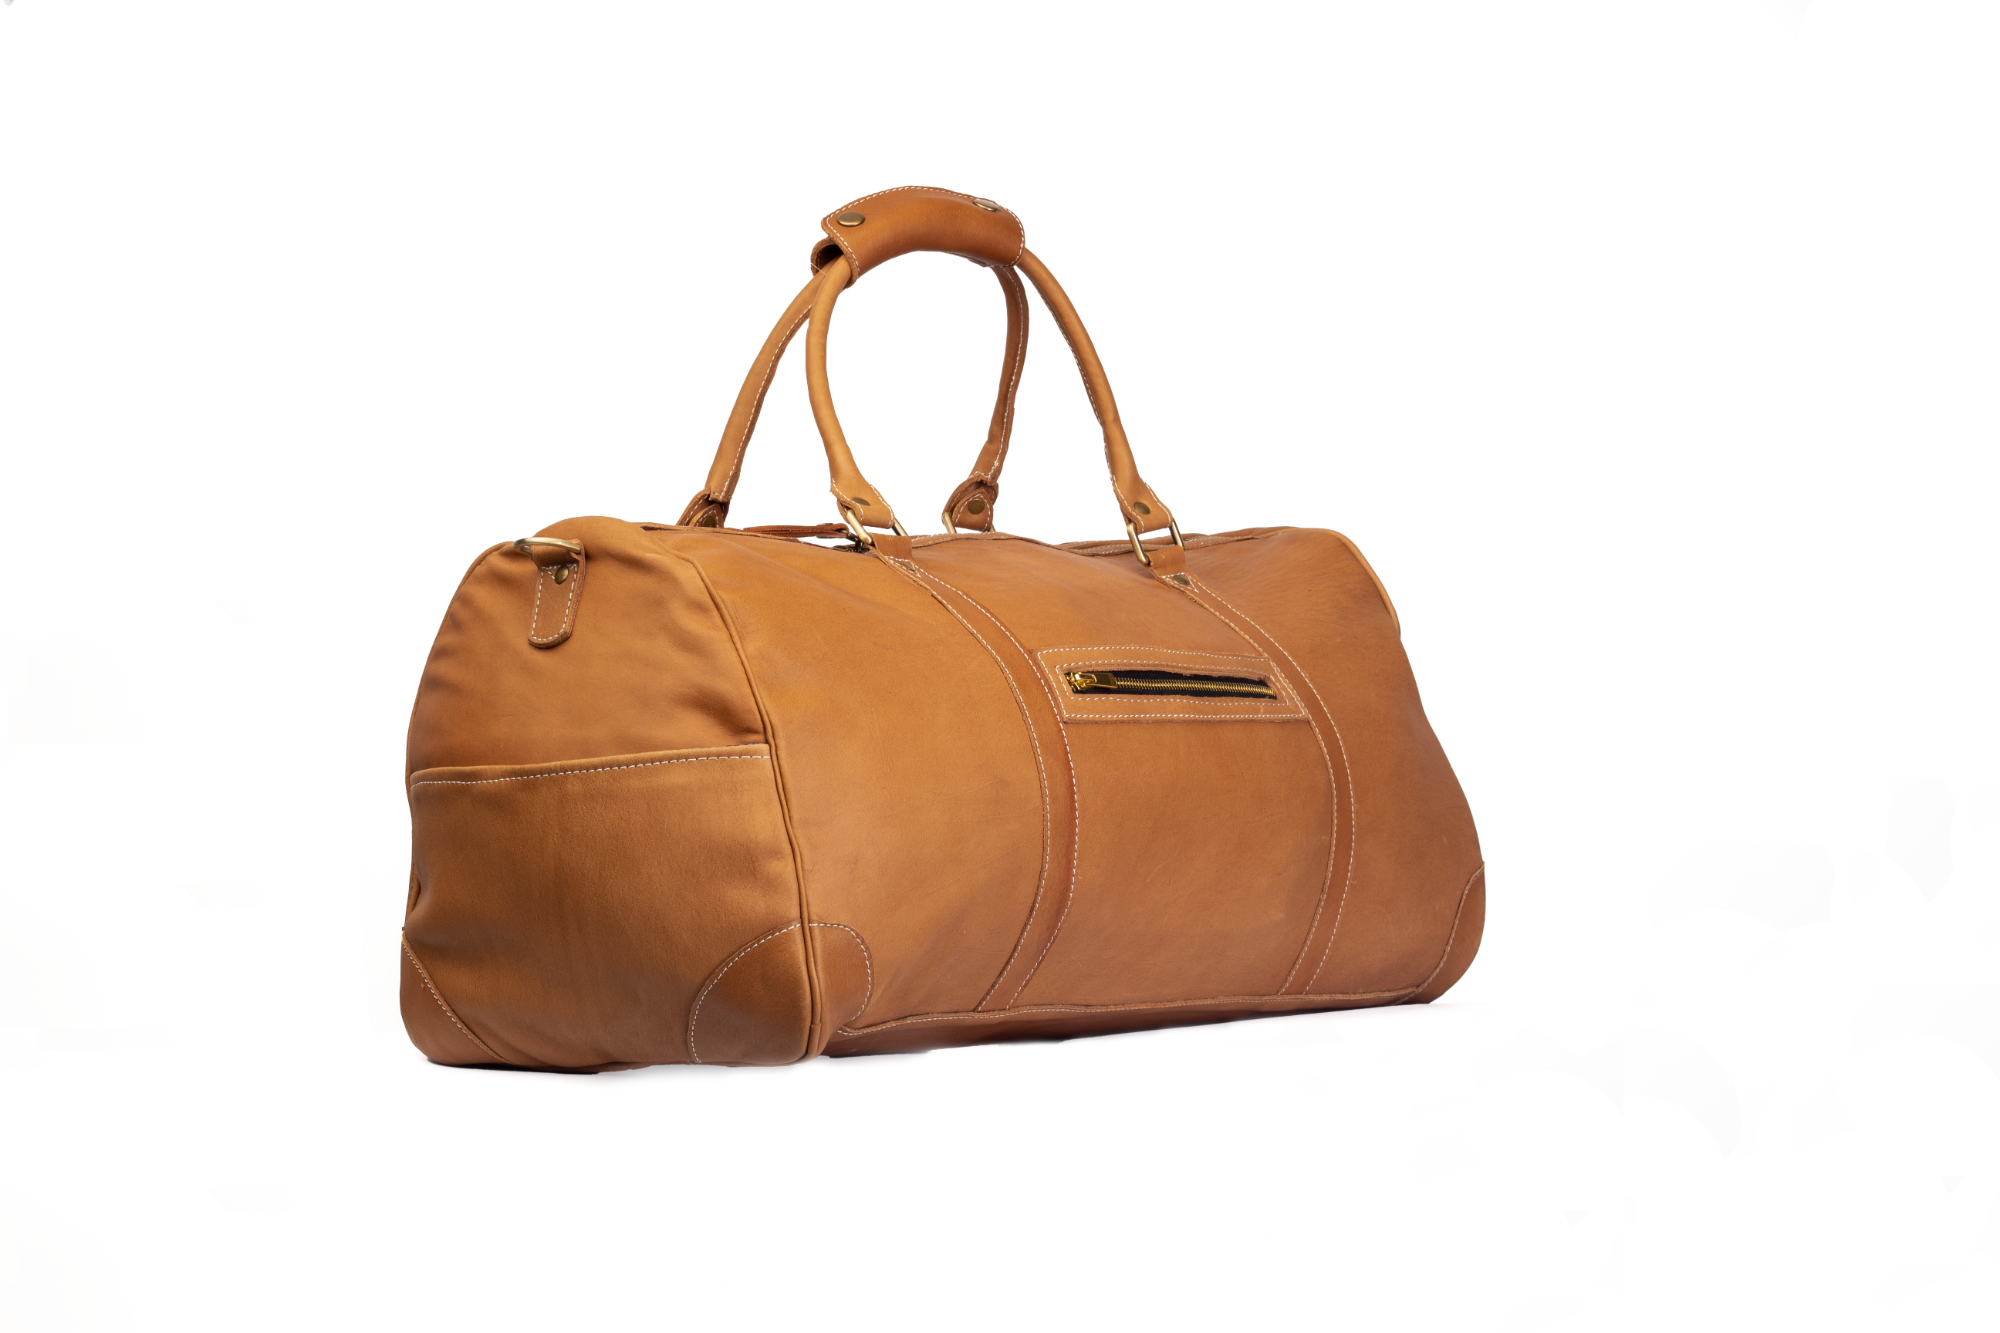 Ulendo Duffle Bag in Tan/Blue - Handcrafted Leather Travel Gear